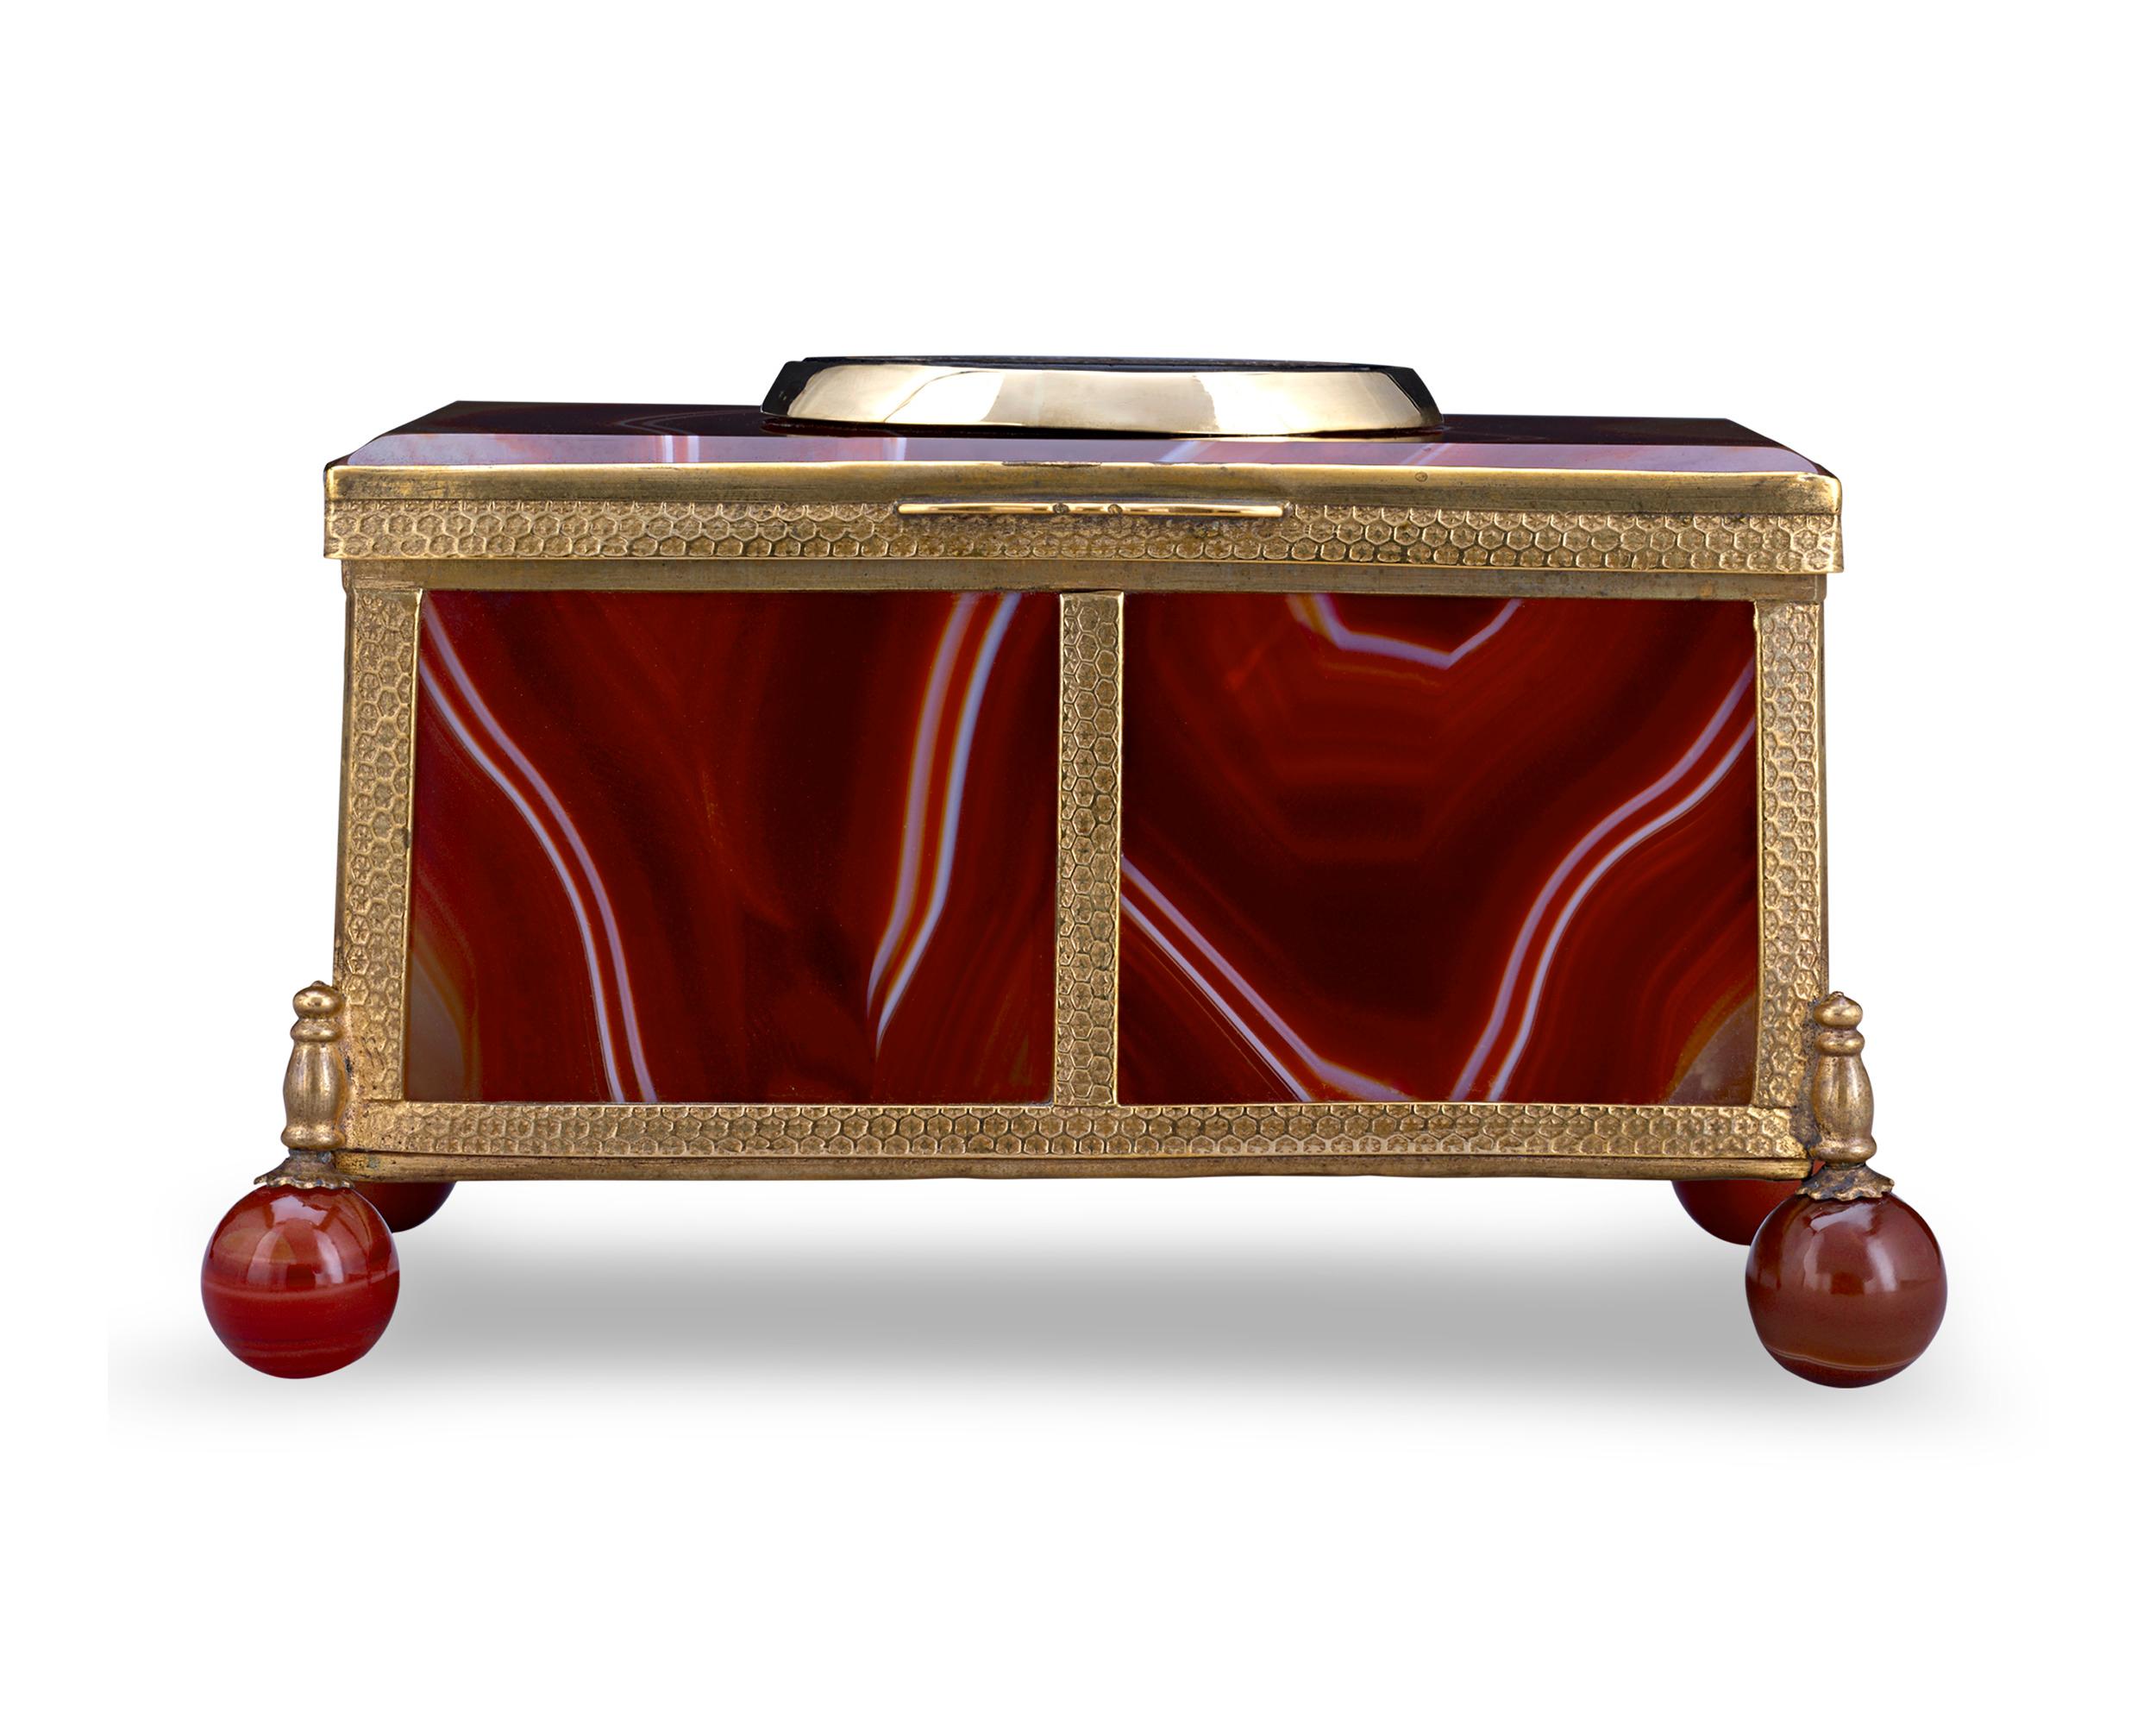 Intricate and flawless, the highly detailed micromosaic medallion on the lid of this agate box is an incredible example of this diminutive art form. The elaborate micromosaic depicts St. Peter’s Square in Vatican City in painstaking detail,